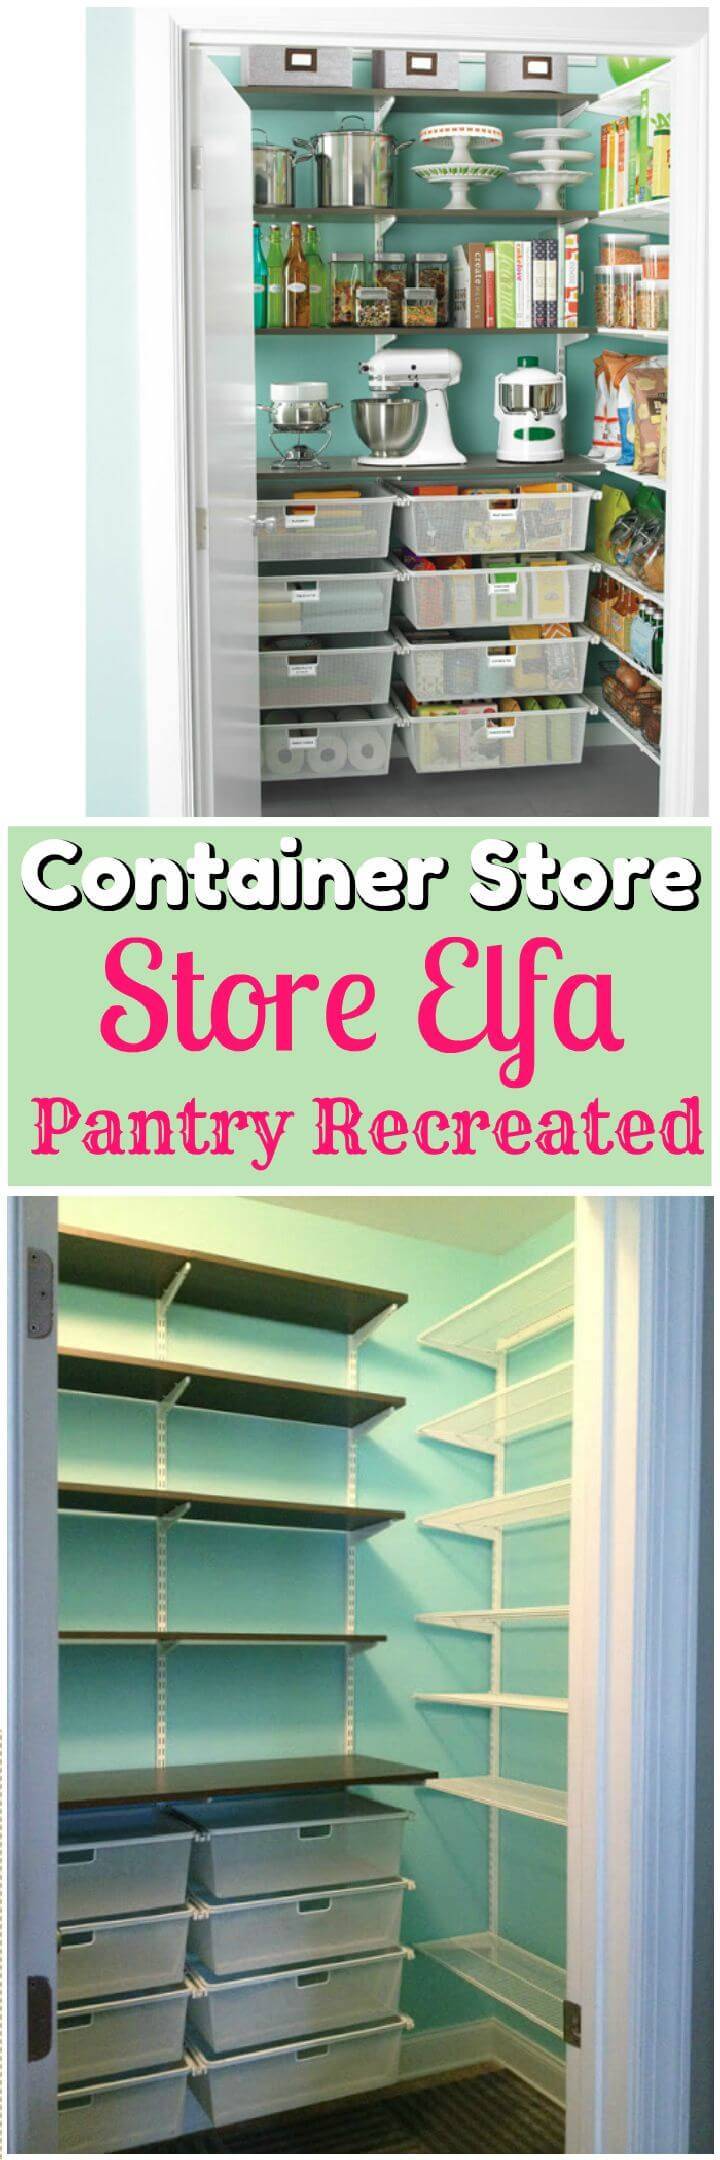 My Container Store Elfa Pantry Recreated